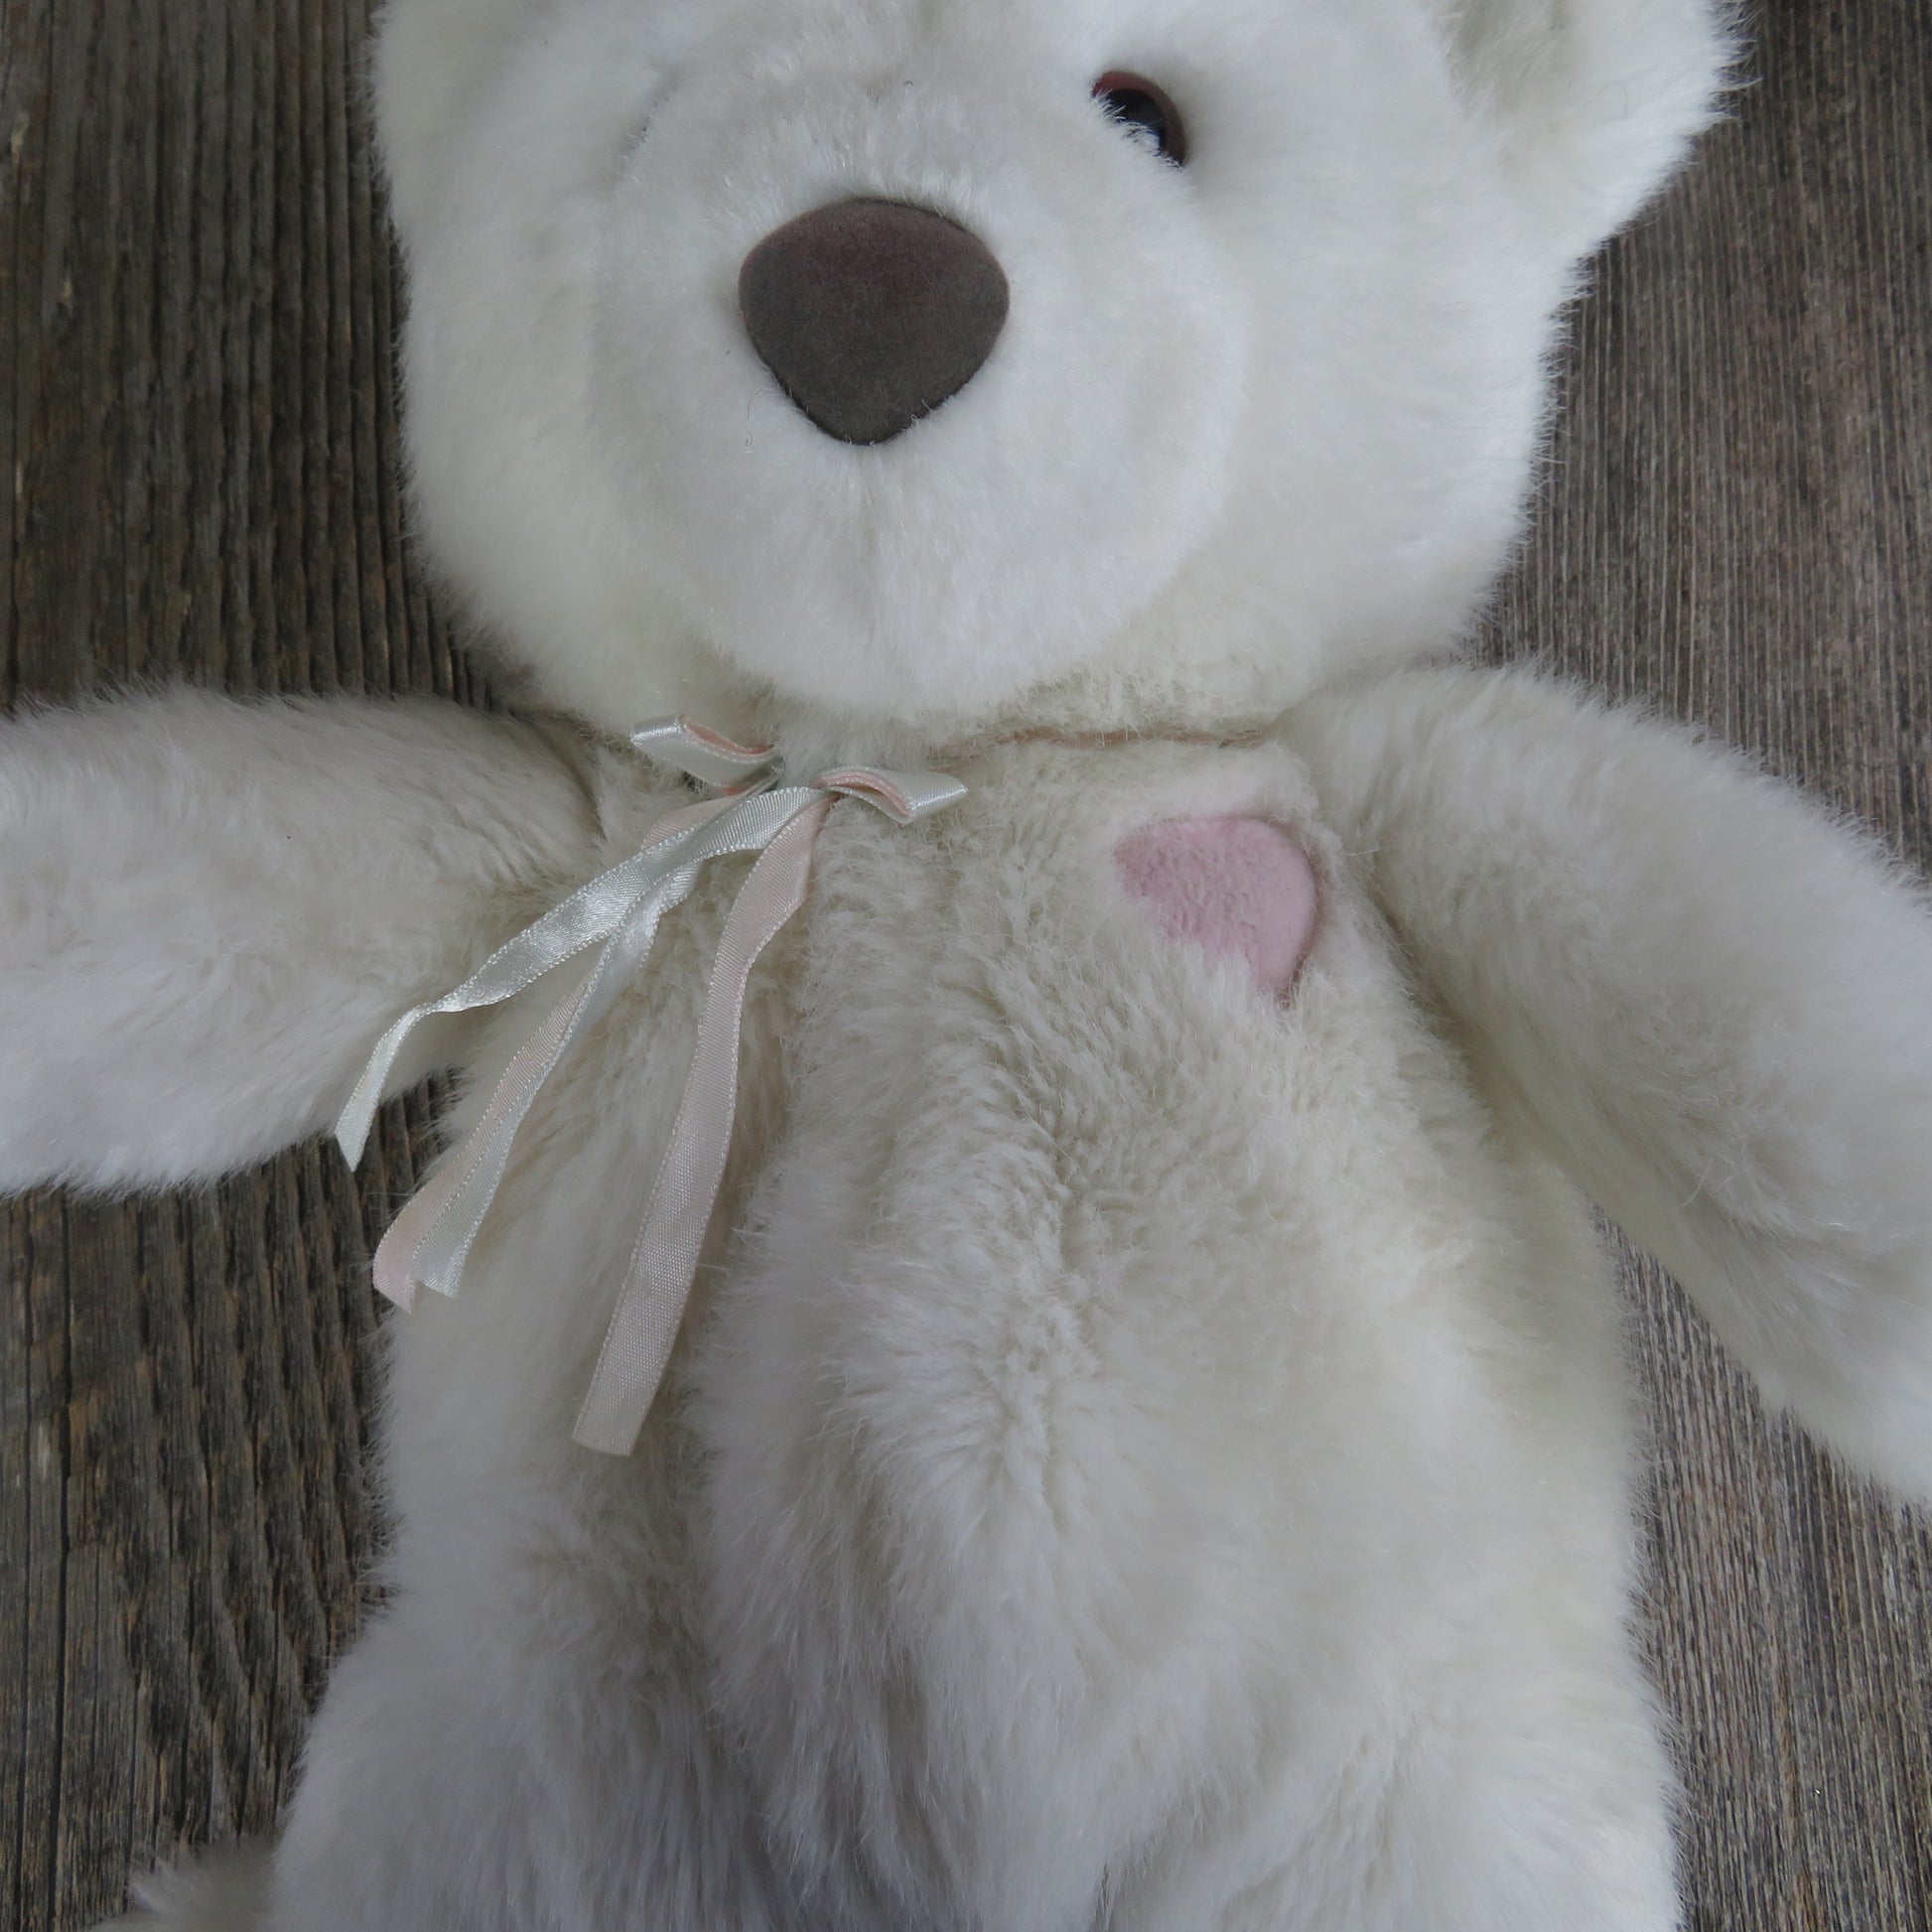 Vintage White Teddy Bear with Pink Heart Dakin 1990 Ribbon Bow Grey Flocked Nose Soft Floppy Limbs Gray - At Grandma's Table